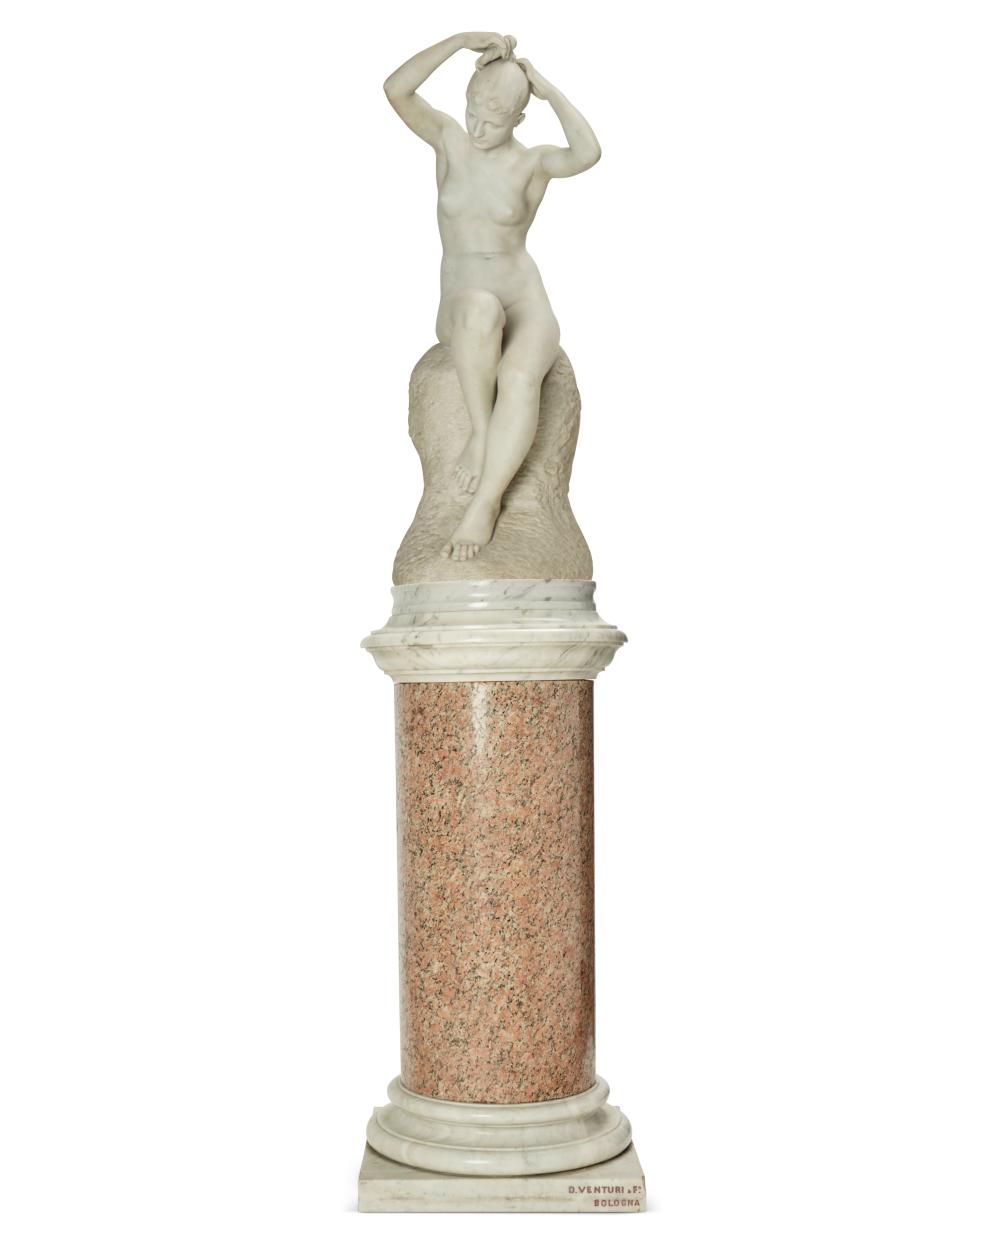 A MARBLE SCULPTURE OF NUDE WOMANA